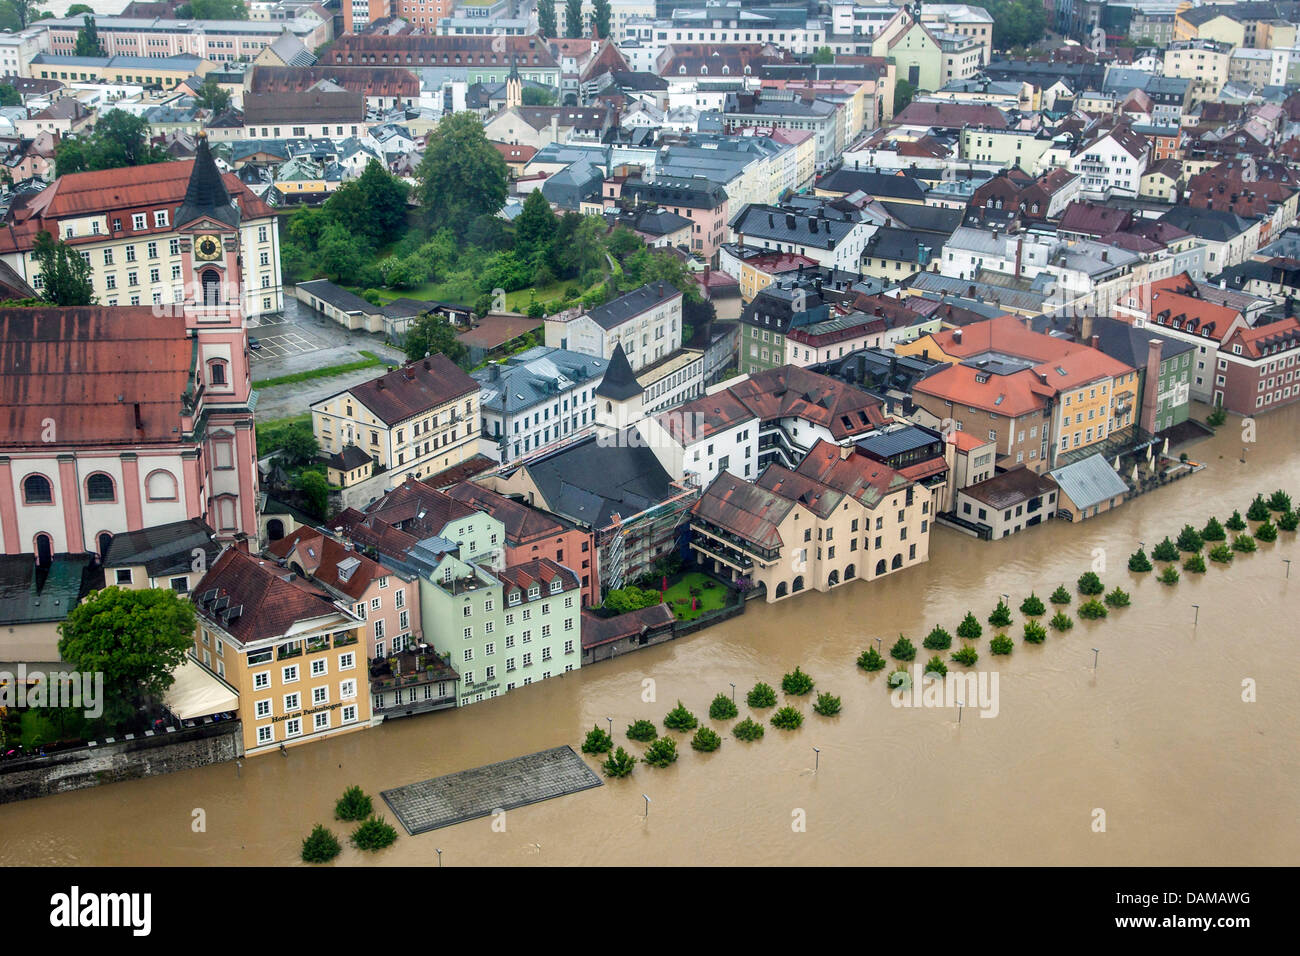 old city flooded in June 2013, Germany, Bavaria, Passau Stock Photo